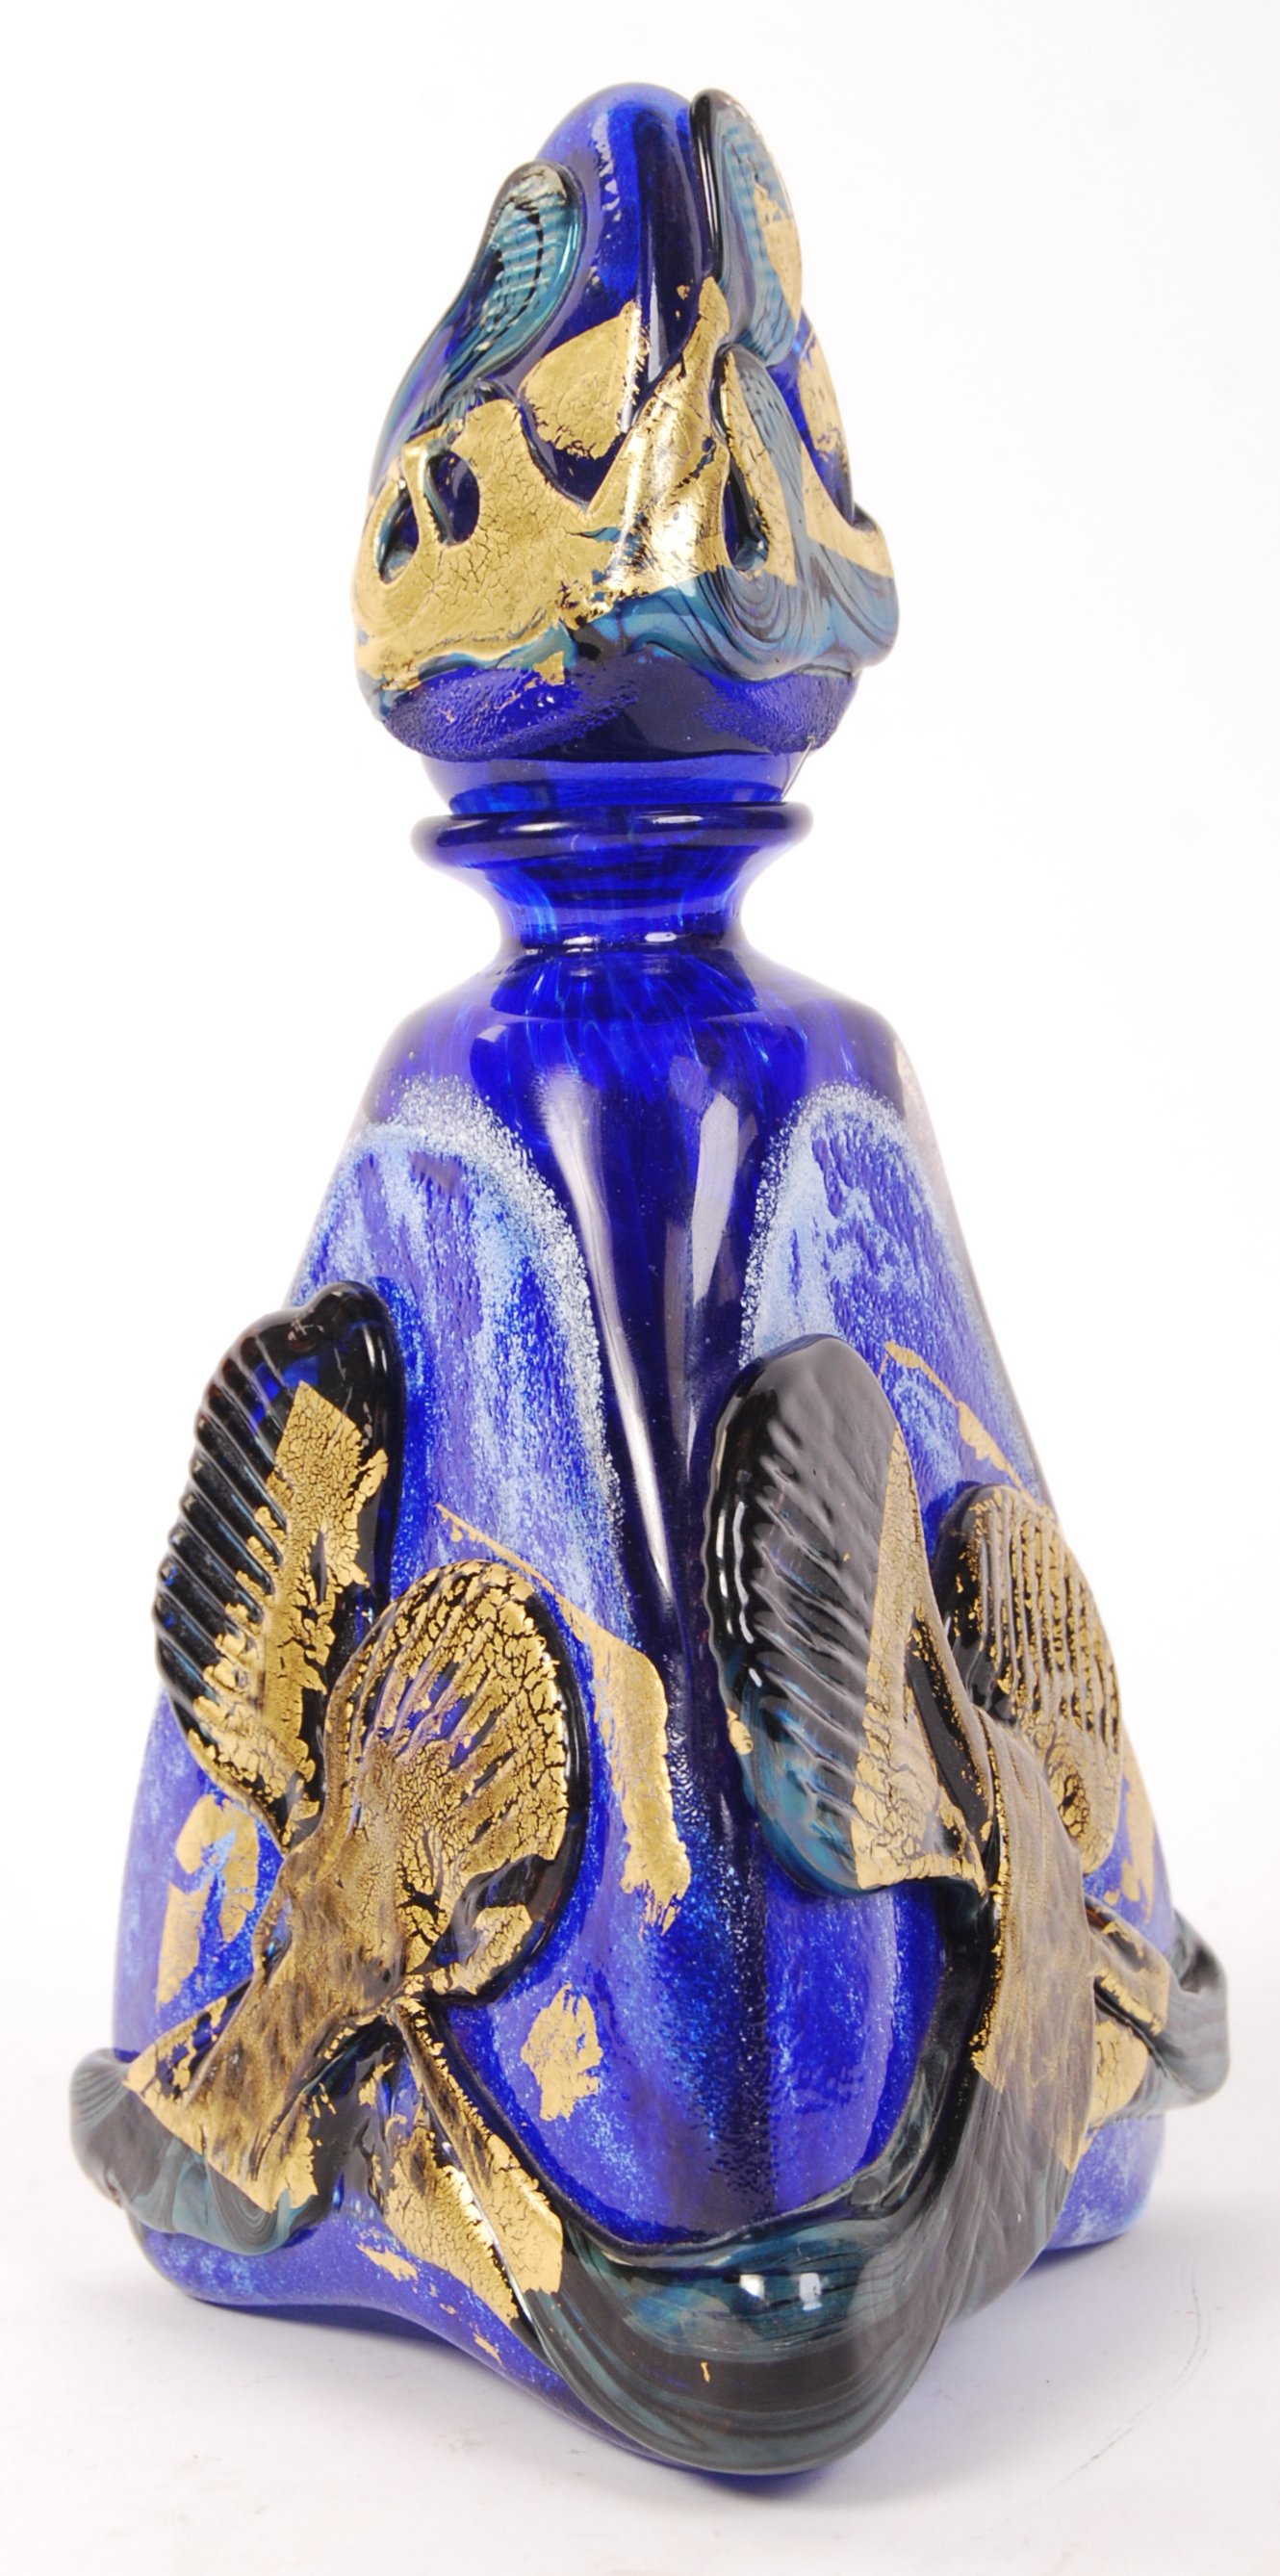 FLACON COMPRESSION 1994 LARGE SCENT BOTTLE BY JEAN-CLAUDE NOVARO - Image 2 of 6